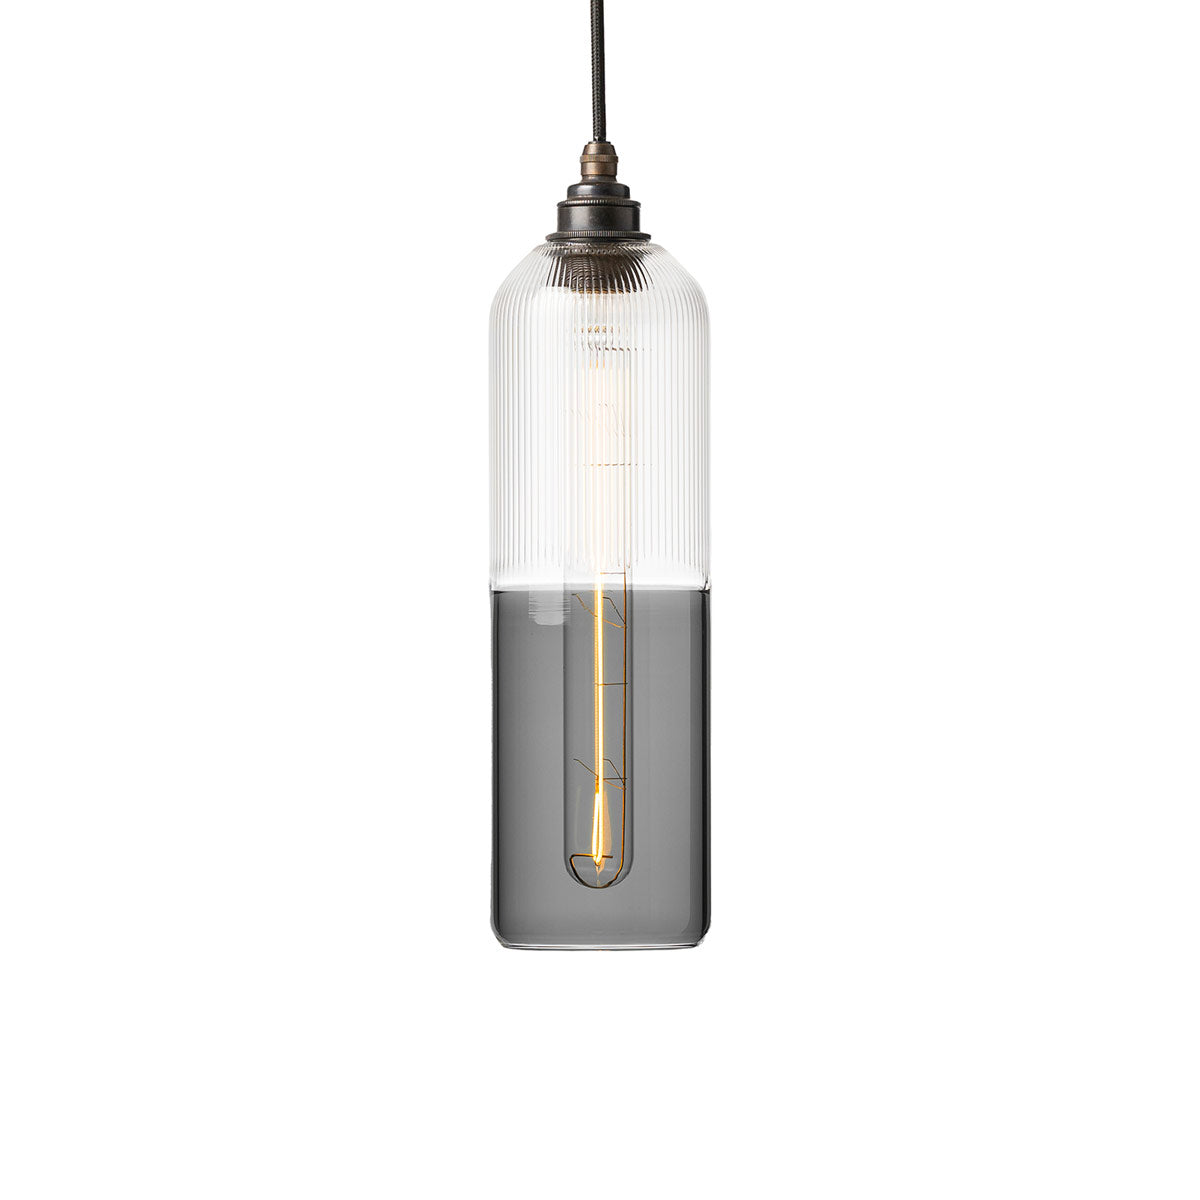 The Leverint Bickley Glass Pendant Light Mixed Profile is a coloured glass pendant light which allows you to customise the top and bottom glass to your requirements. This example features fine ribbed glass at the top and transparent black glass on the bottom and is sold by South Charlotte Fine Lighting